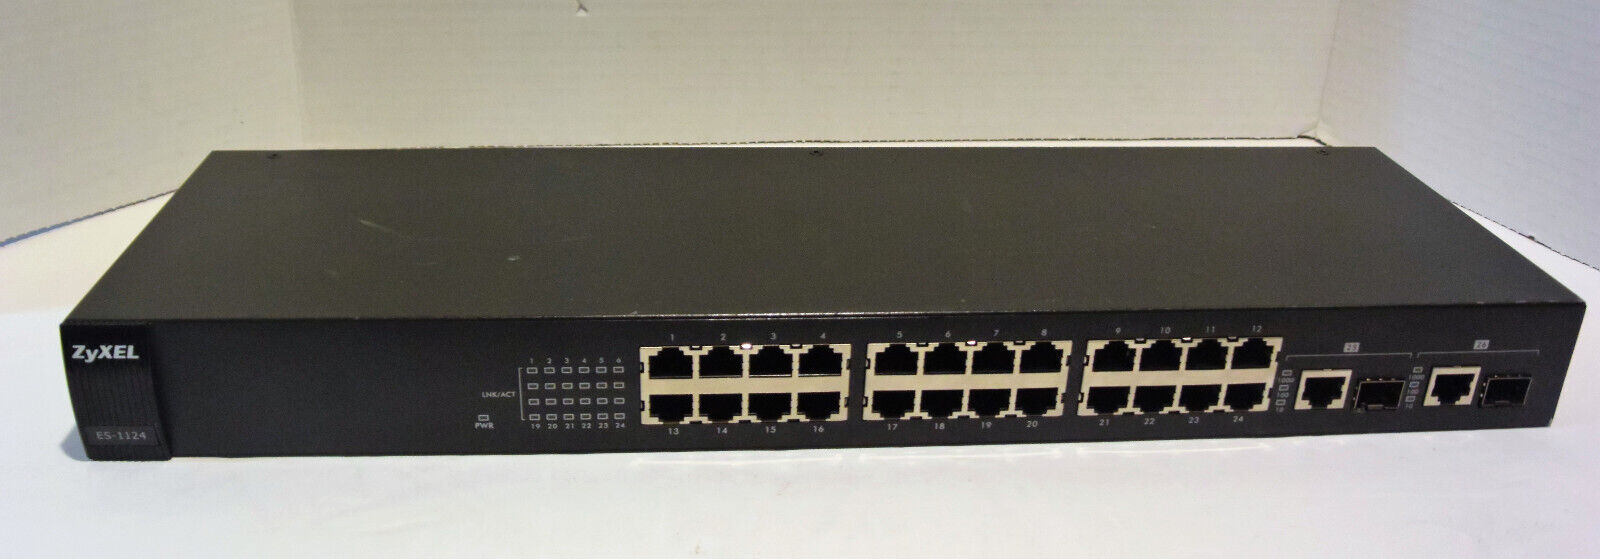 ZyXEL ES-1124 Ethernet Switch 24 Port - Tested & Working